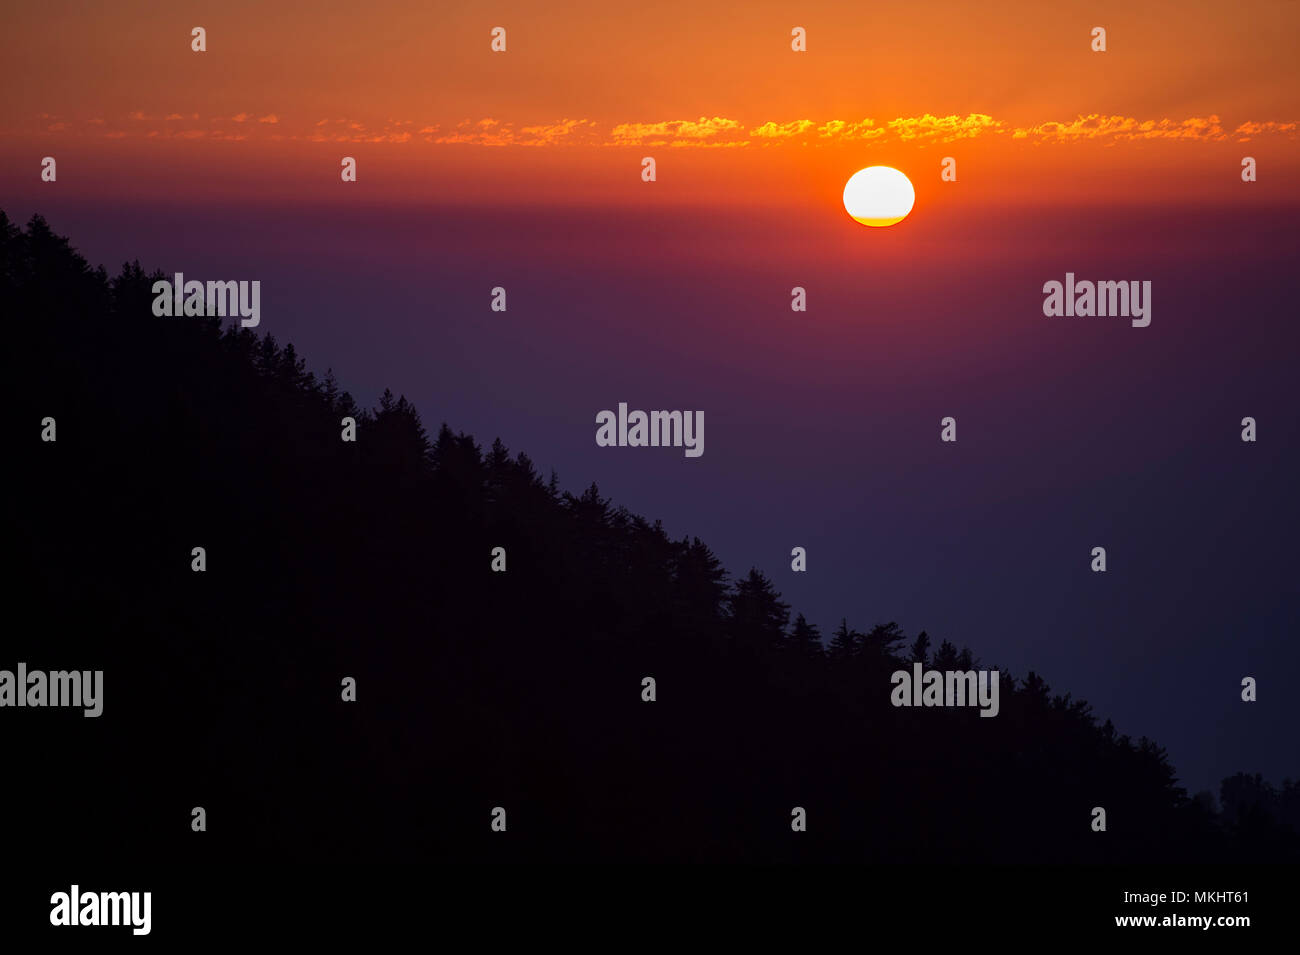 Amazing sunset behind a mountain with the silhouette of trees, Dharamsala, India. Stock Photo